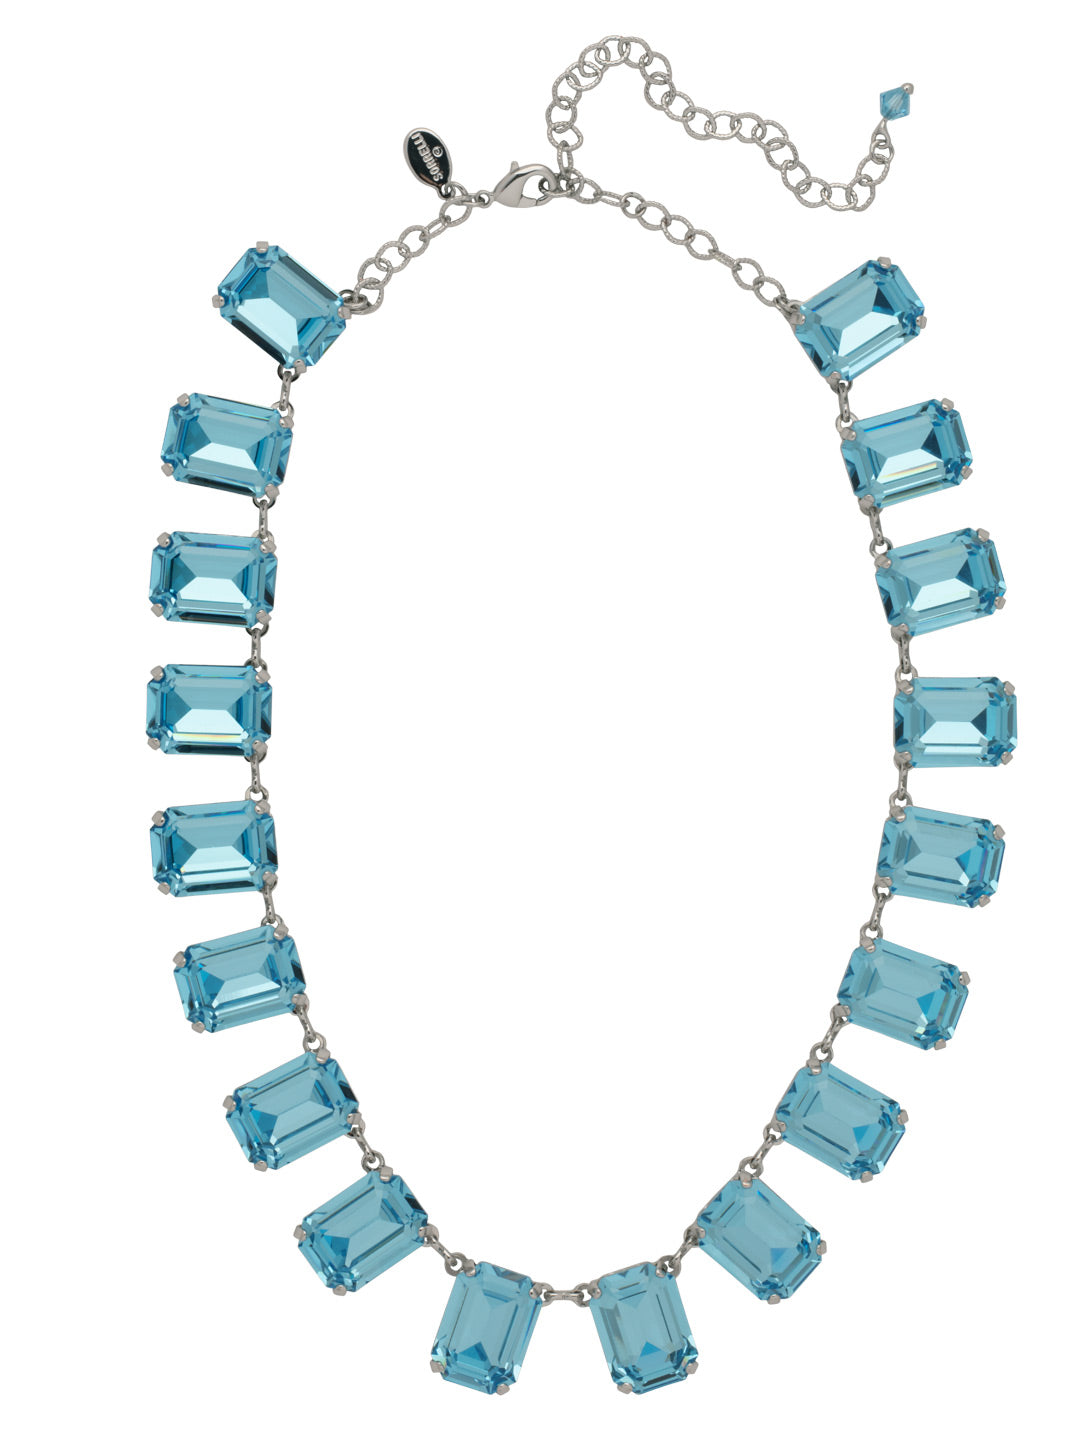 Julianna Emerald Statement Necklace - NFD77PDAQU - <p>The Julianna Emerald Statement Necklace features a row of octagon cut candy drop crystals around an adjustable chain, secured with a lobster claw clasp. From Sorrelli's Aquamarine collection in our Palladium finish.</p>